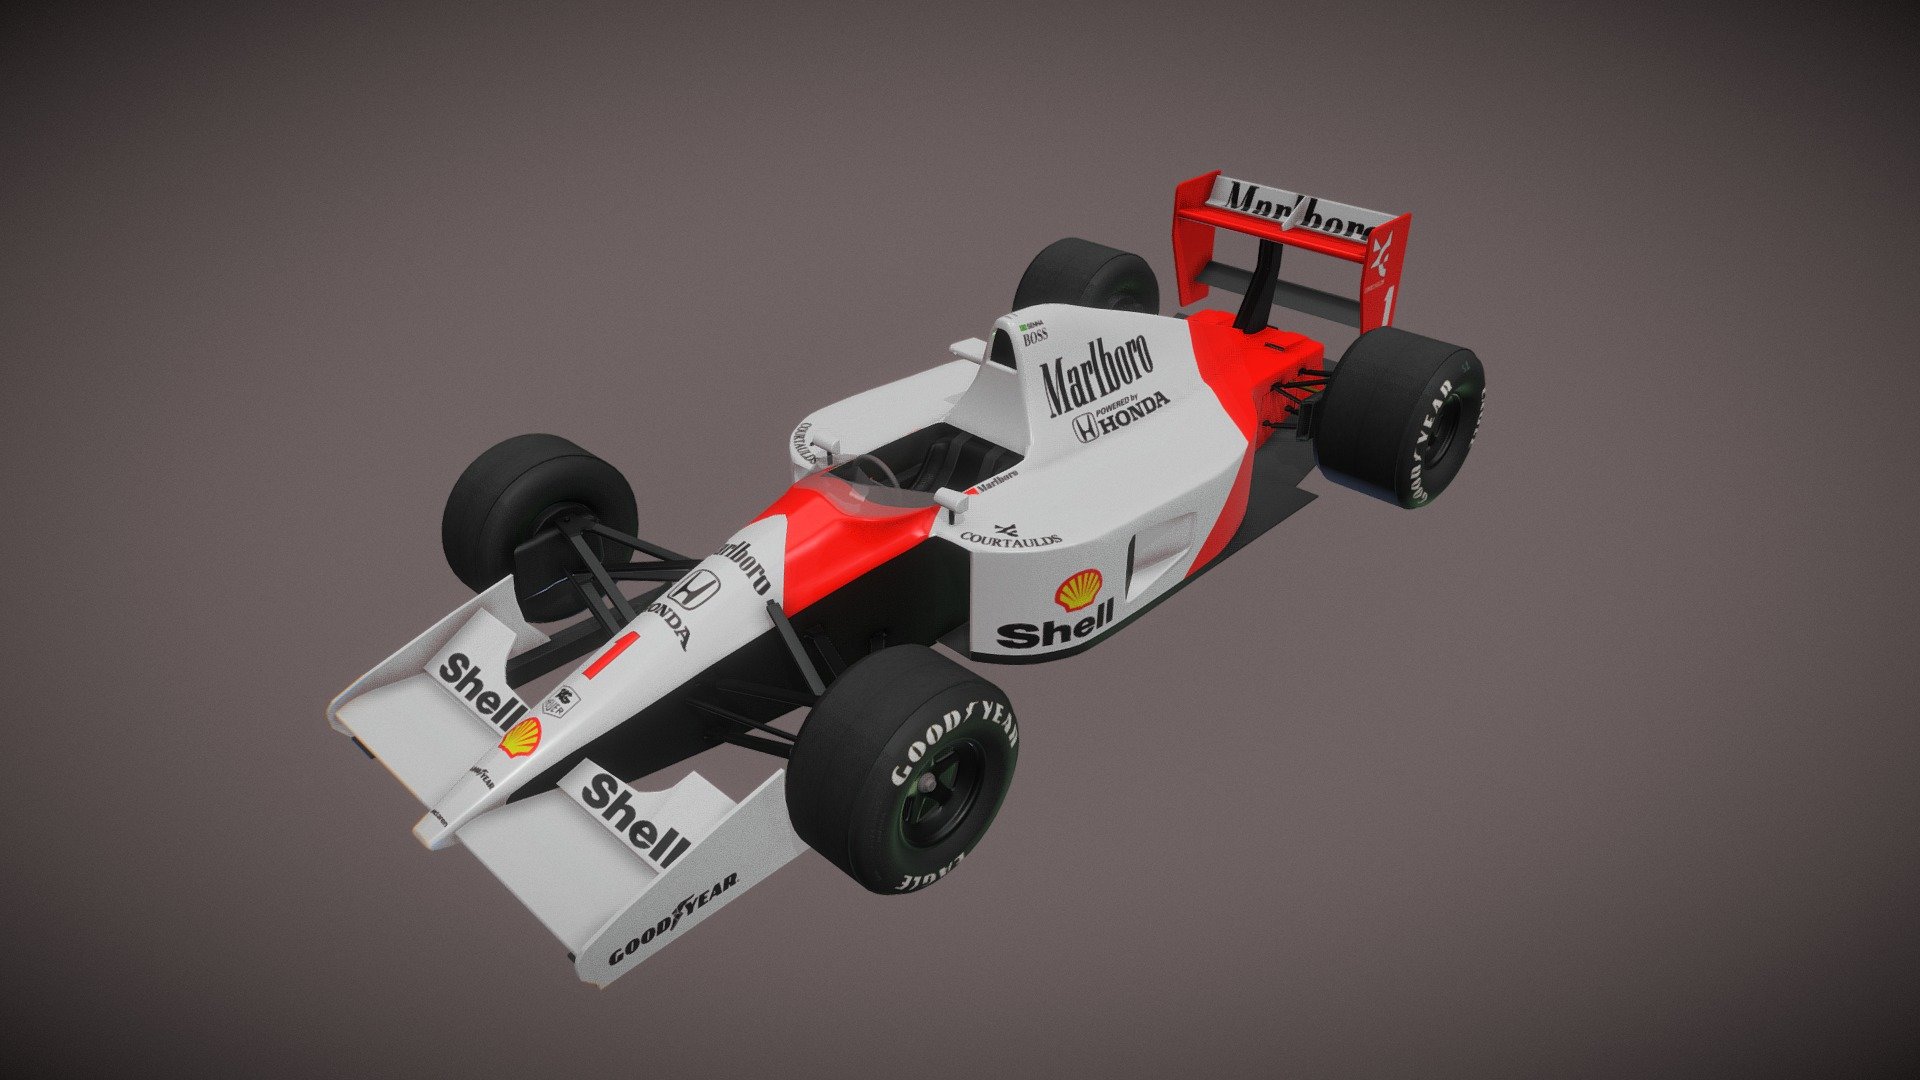 McLaren MP4/6

The McLaren MP4/6 is a Formula One racing car designed by Neil Oatley for use by the McLaren team in the 1991 Formula One season. It was driven by reigning World Champion, Brazilian Ayrton Senna, and Austria's Gerhard Berger 3d model